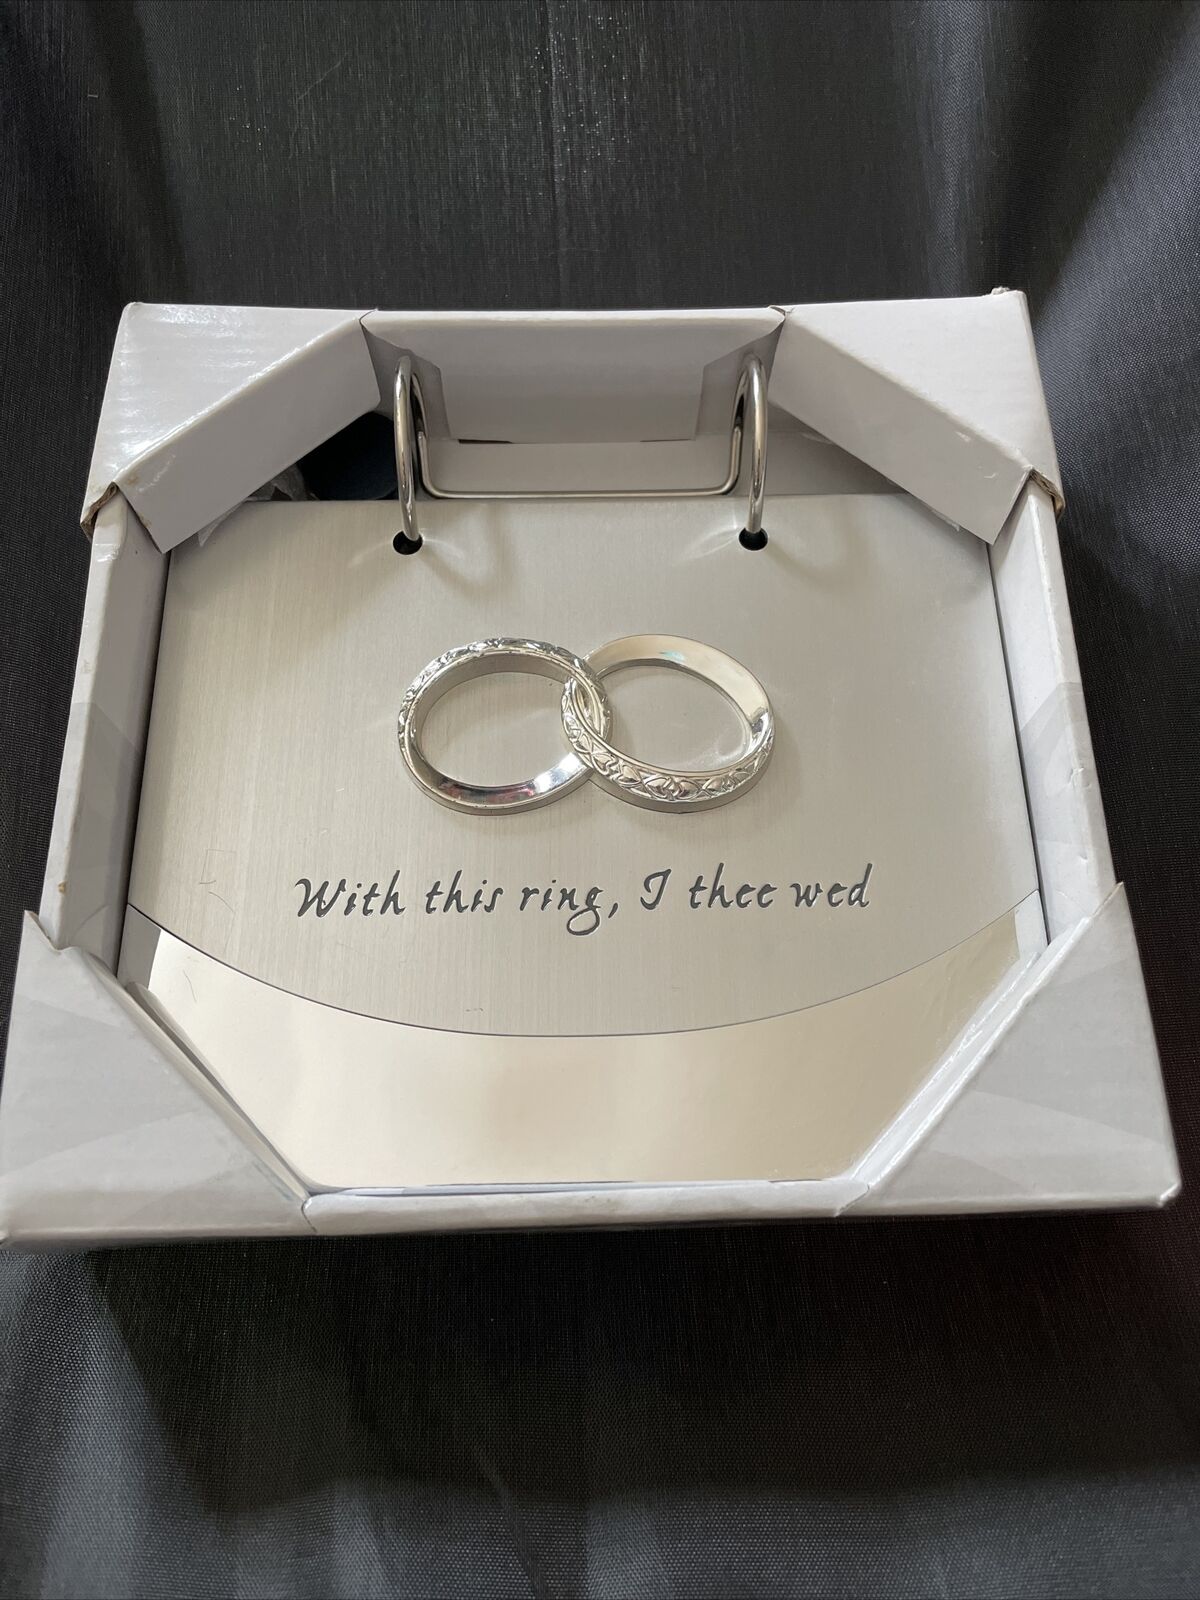 Malden International Wedding Photo Flip Album 4x6 With This Ring I Thee Wed for sale online